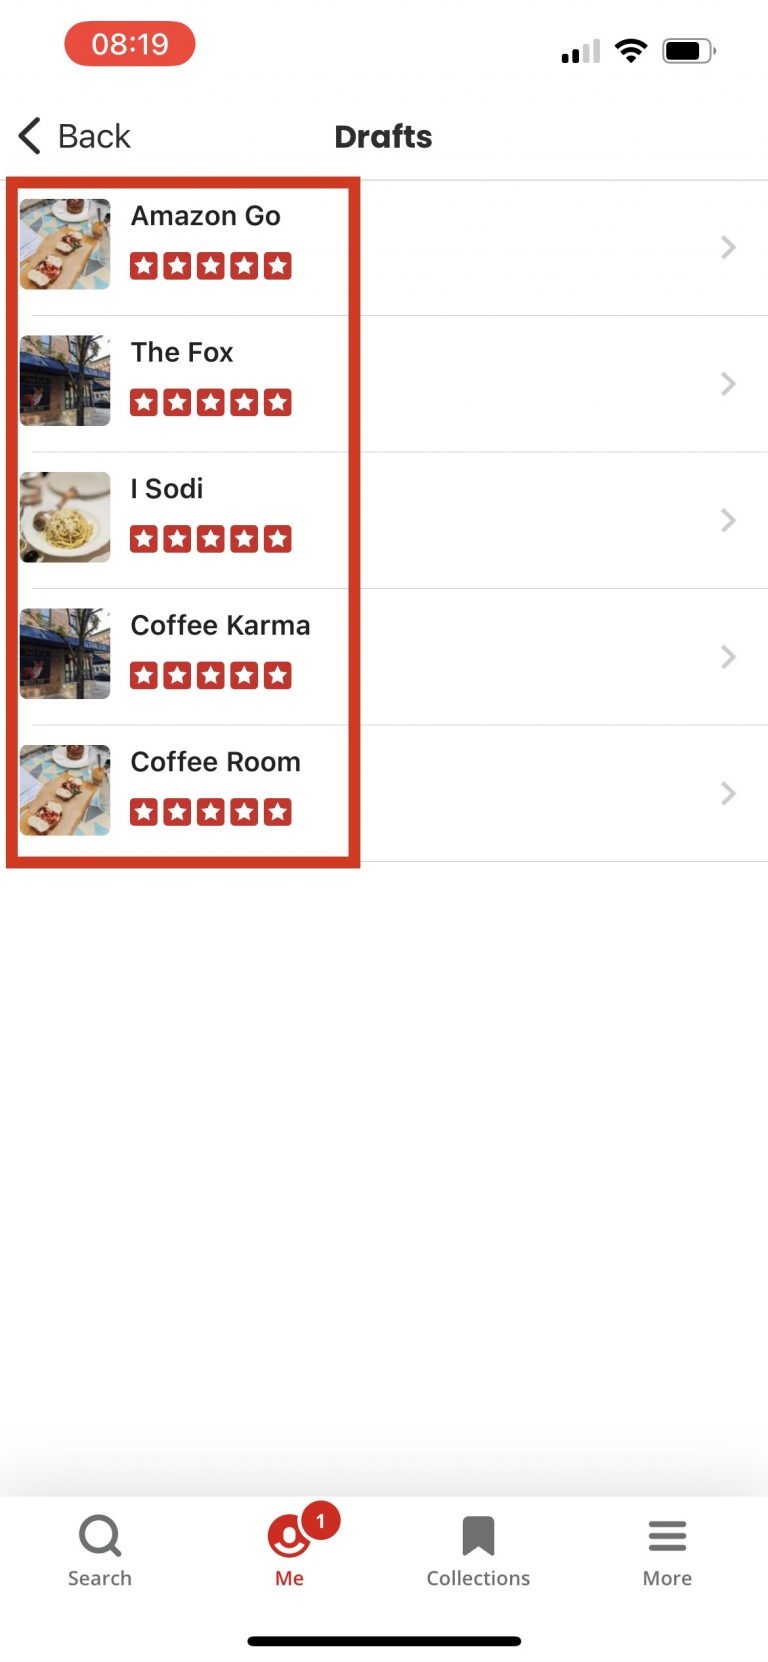 Restaurant icons get substituted in 